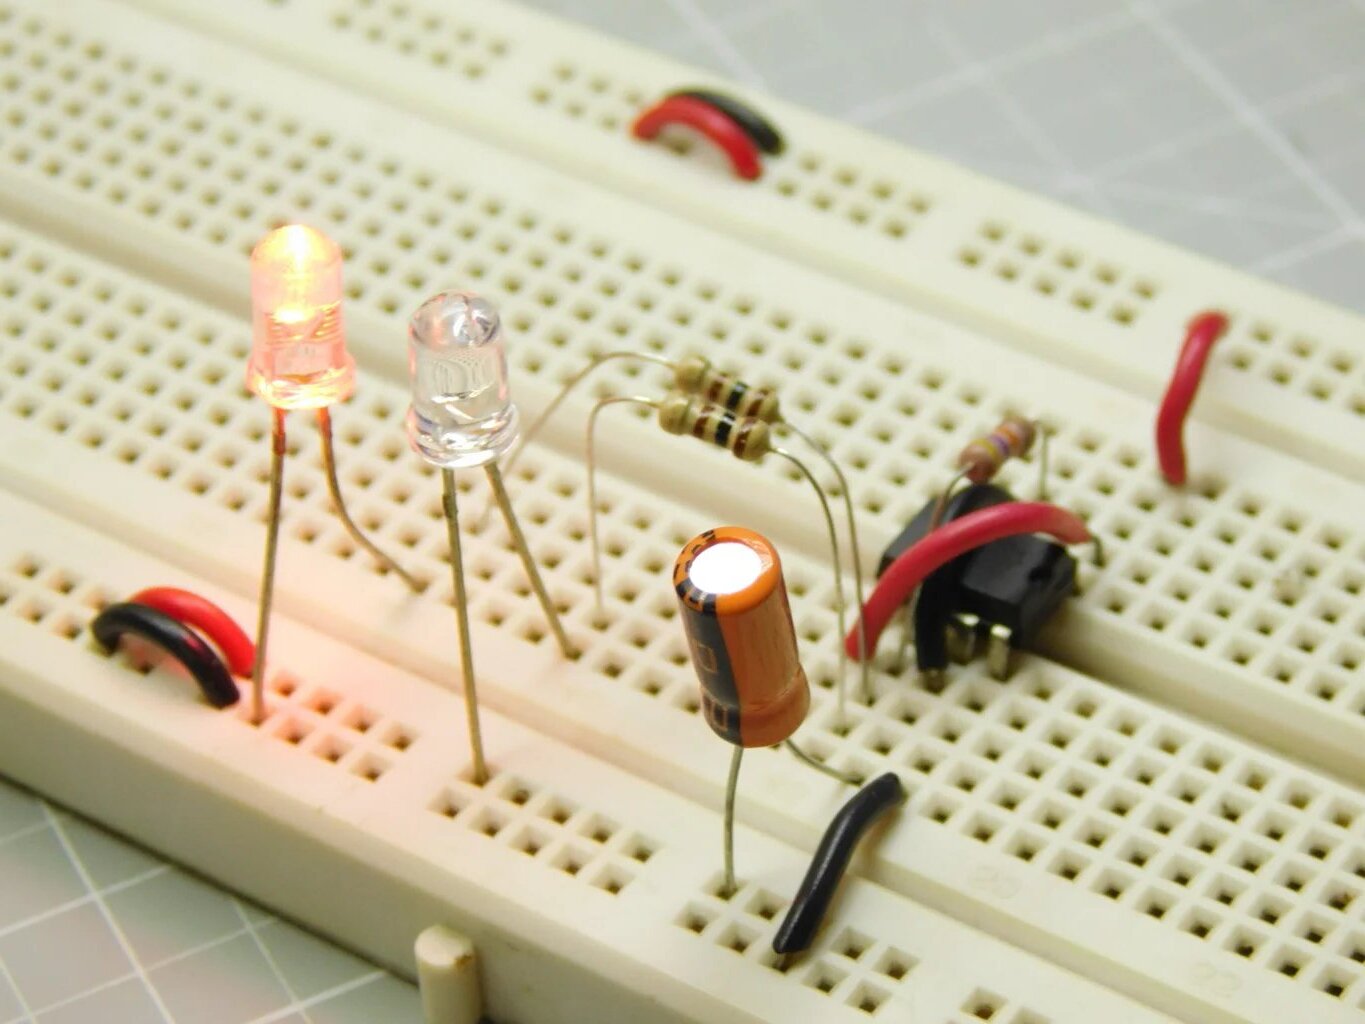 Simple Breadboard Circuits: DIY Guide For Crafting